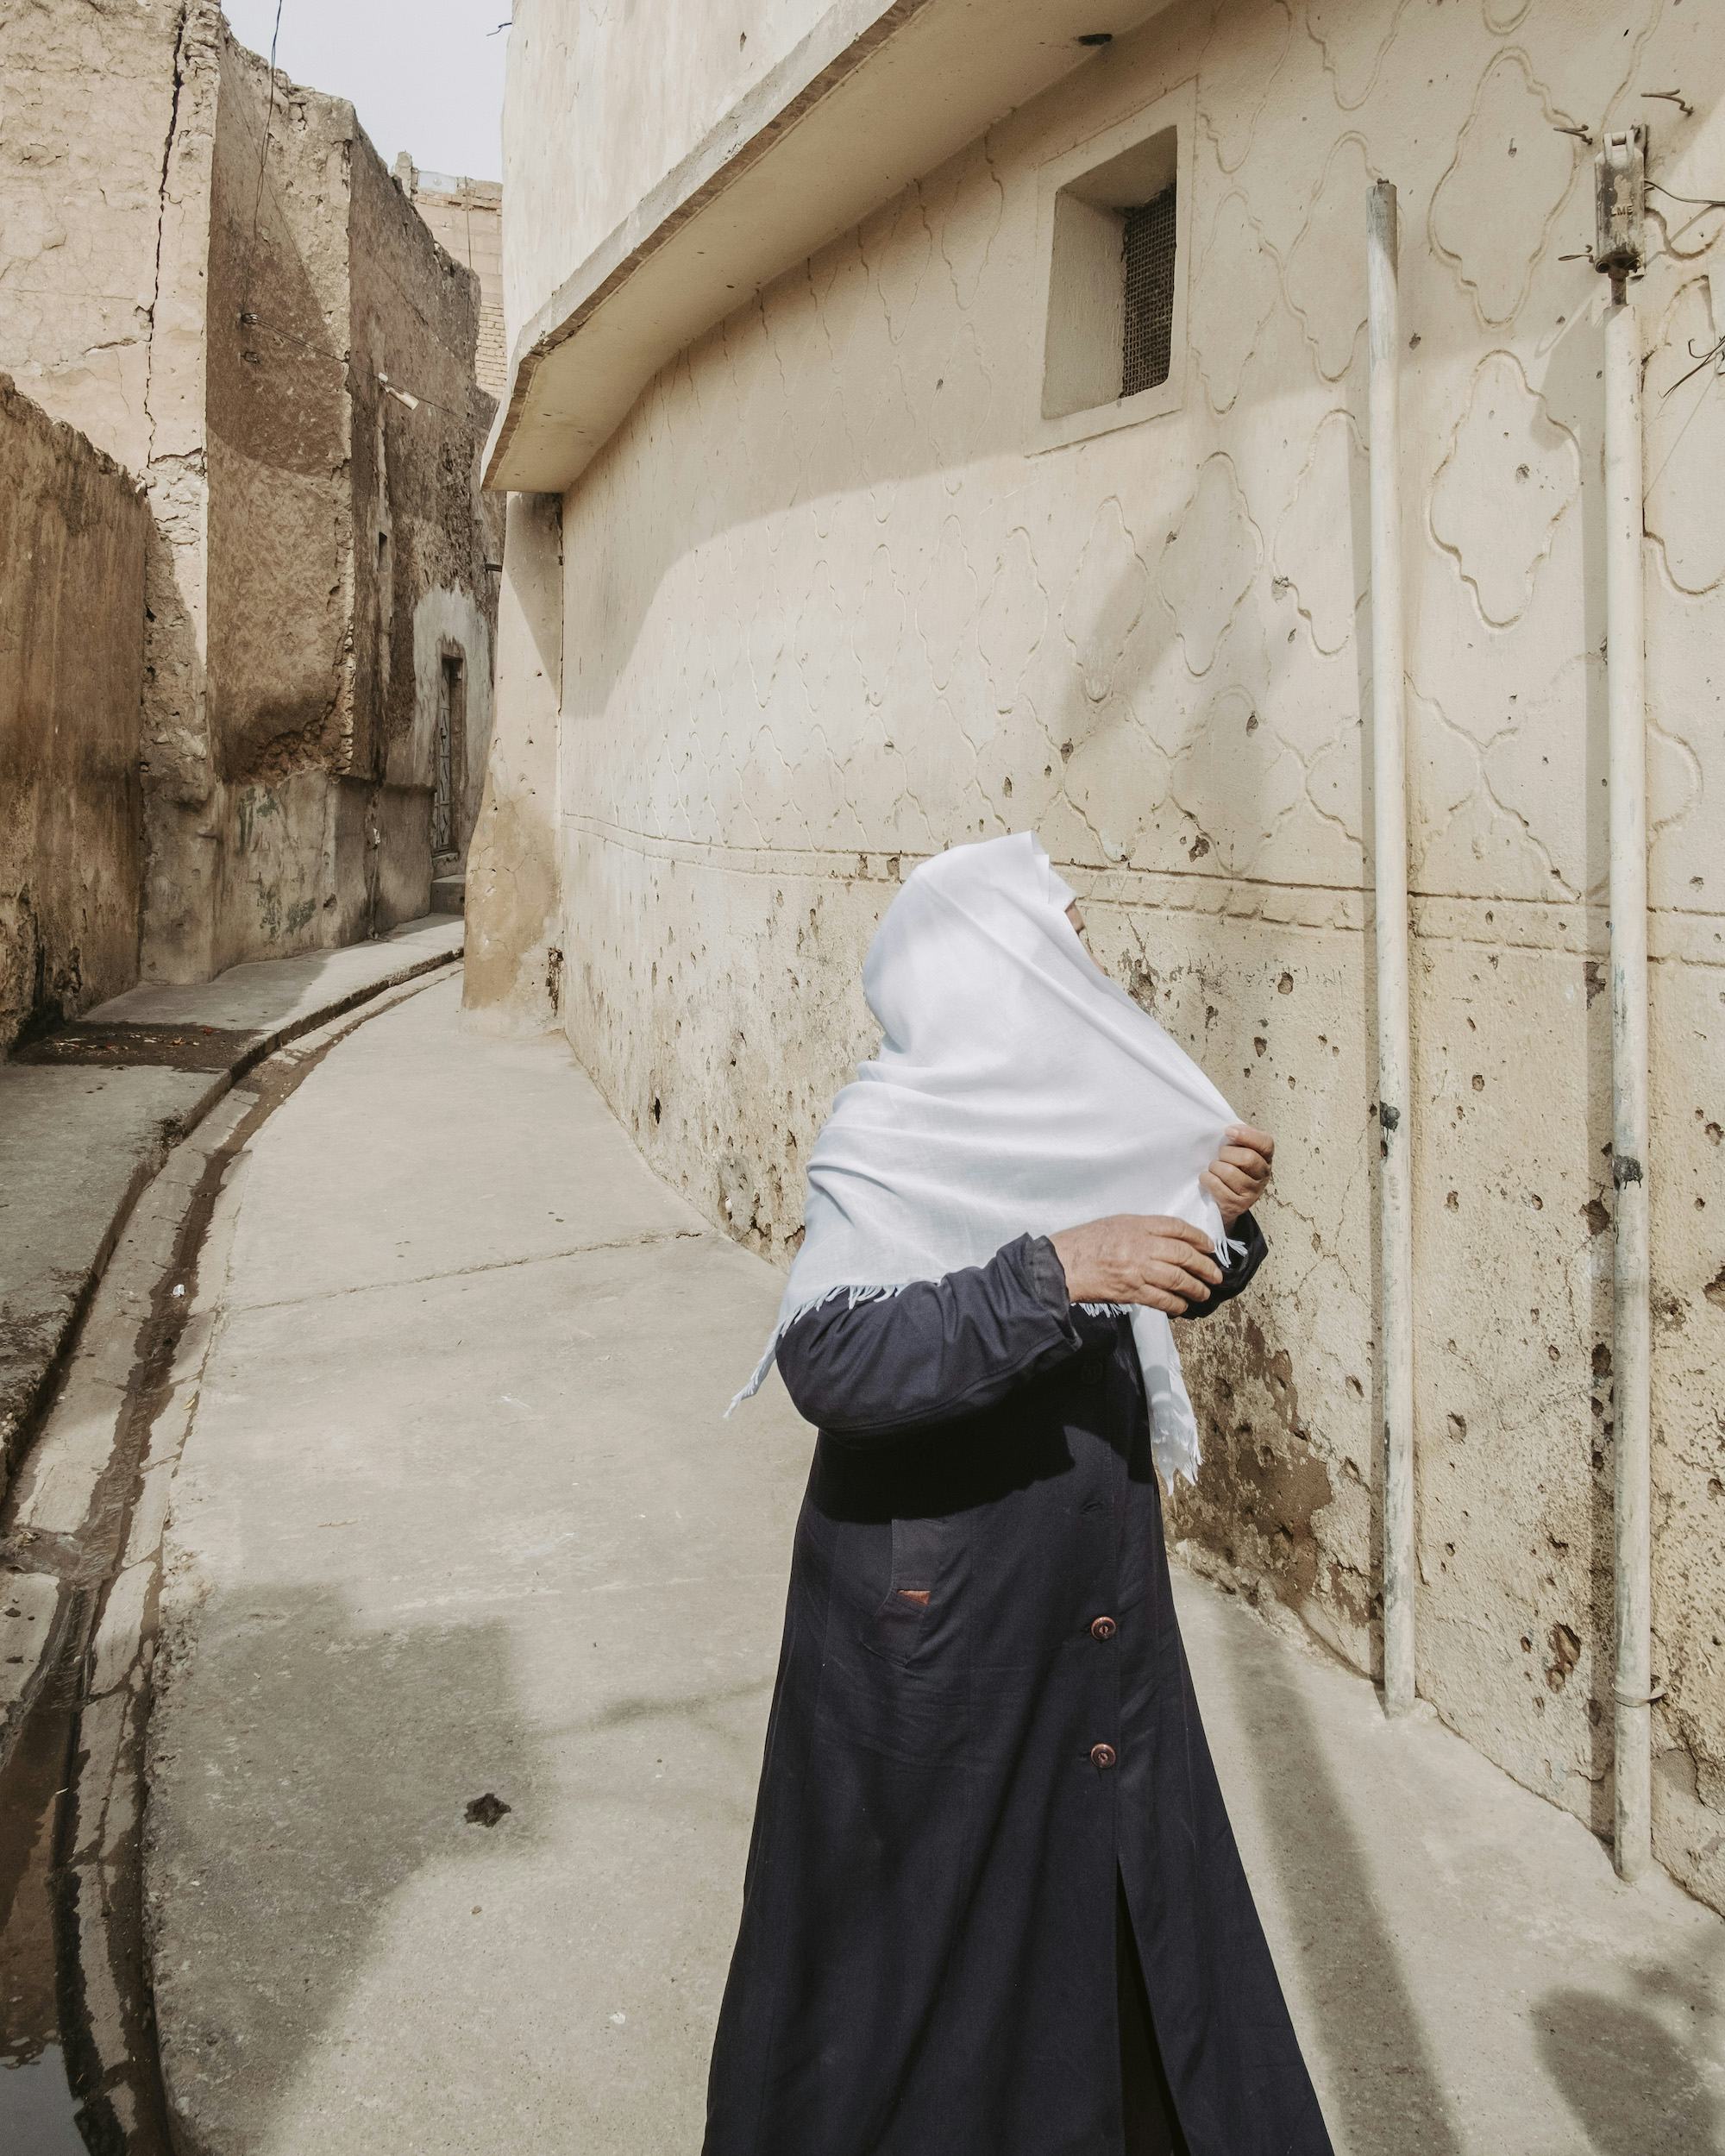 Image of an Iraqi woman in a black robe on an empty street, wearing a white hijab. Her face is turned away and hidden behind the hijab she pulls over her face.